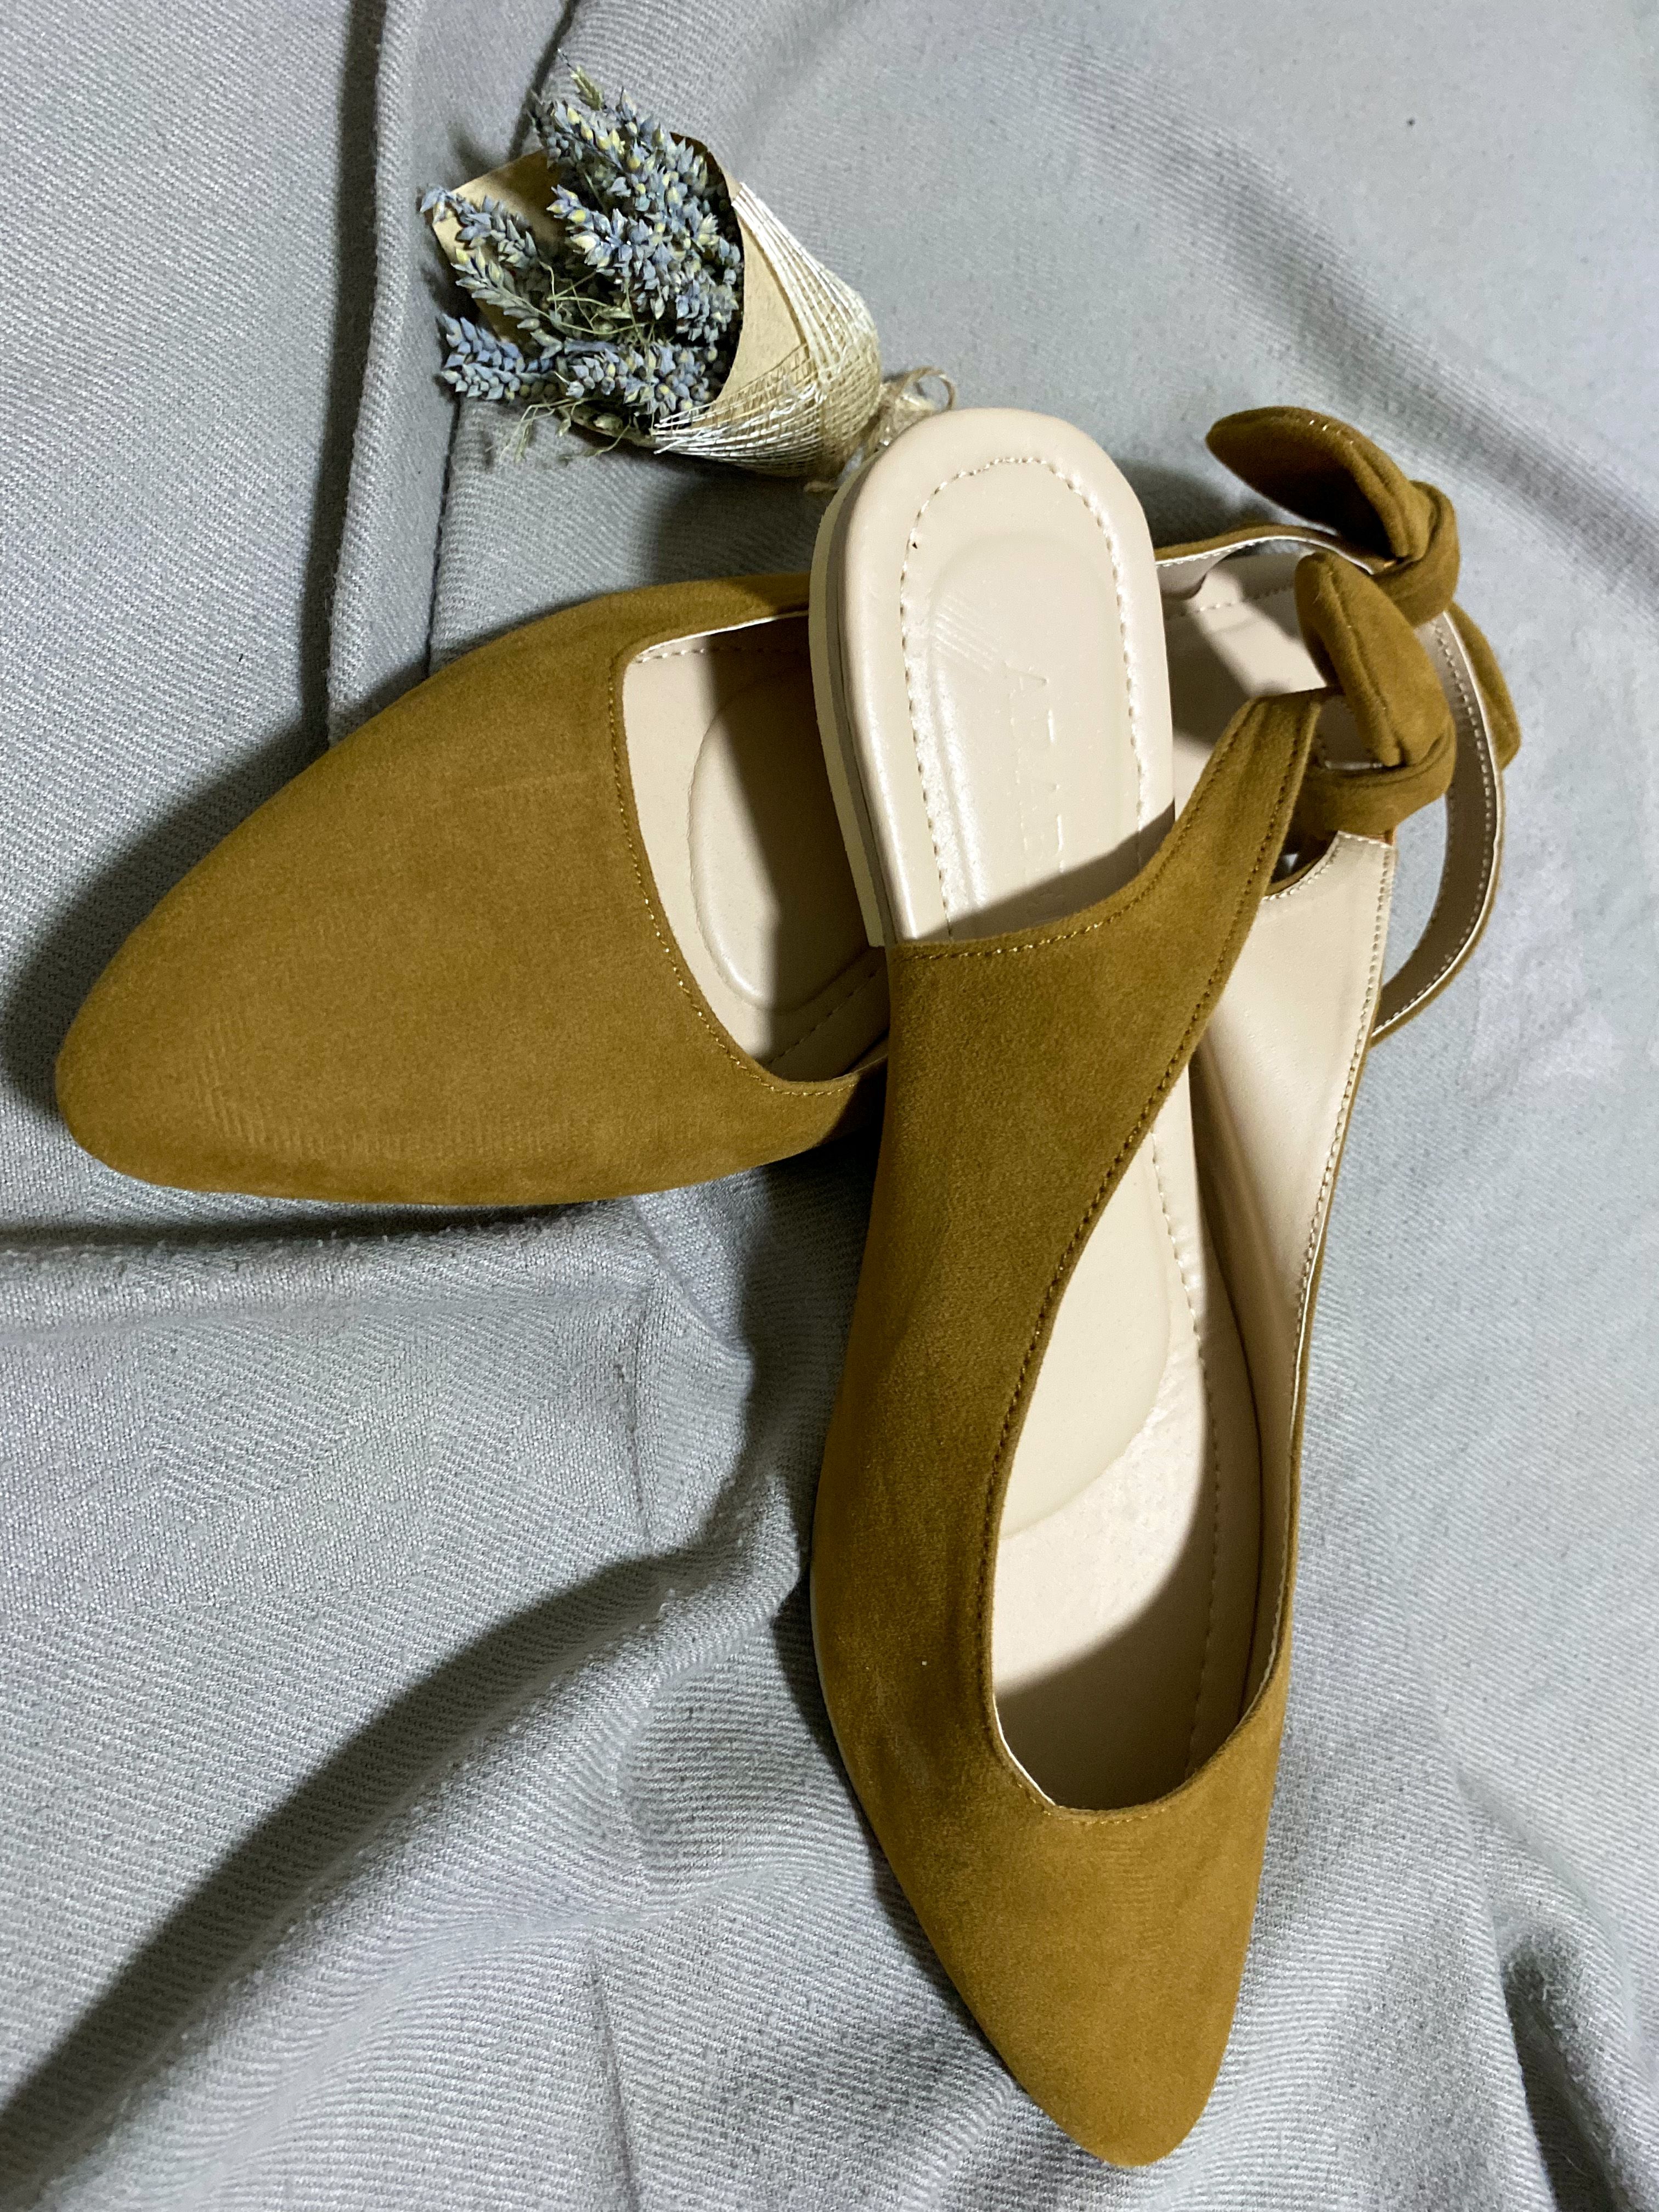 Arabella Denise Pointed Flat Slingback Mules in Gamosa or Suede